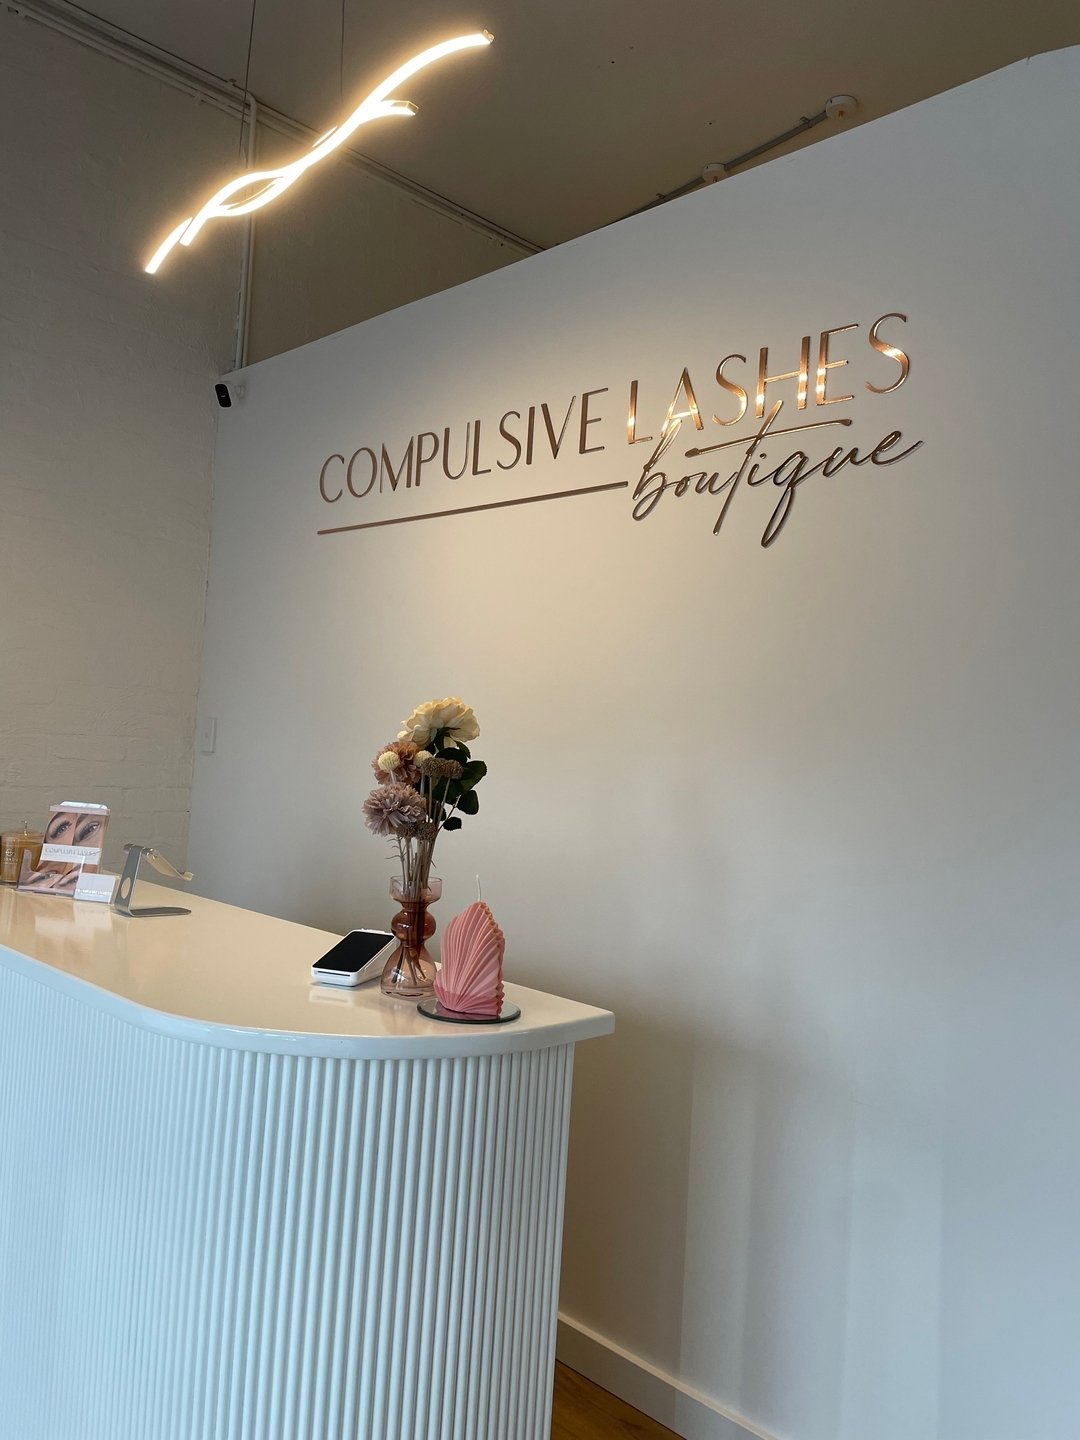 Why choose Compulsive Lashes Boutique ? ✨⤵️ 

The answer is simple WE CARE ✨🥰 we not only care about each of our lovely clients personally but we also care about your end result, your lash and brow health and integrity, we care about you loving the 